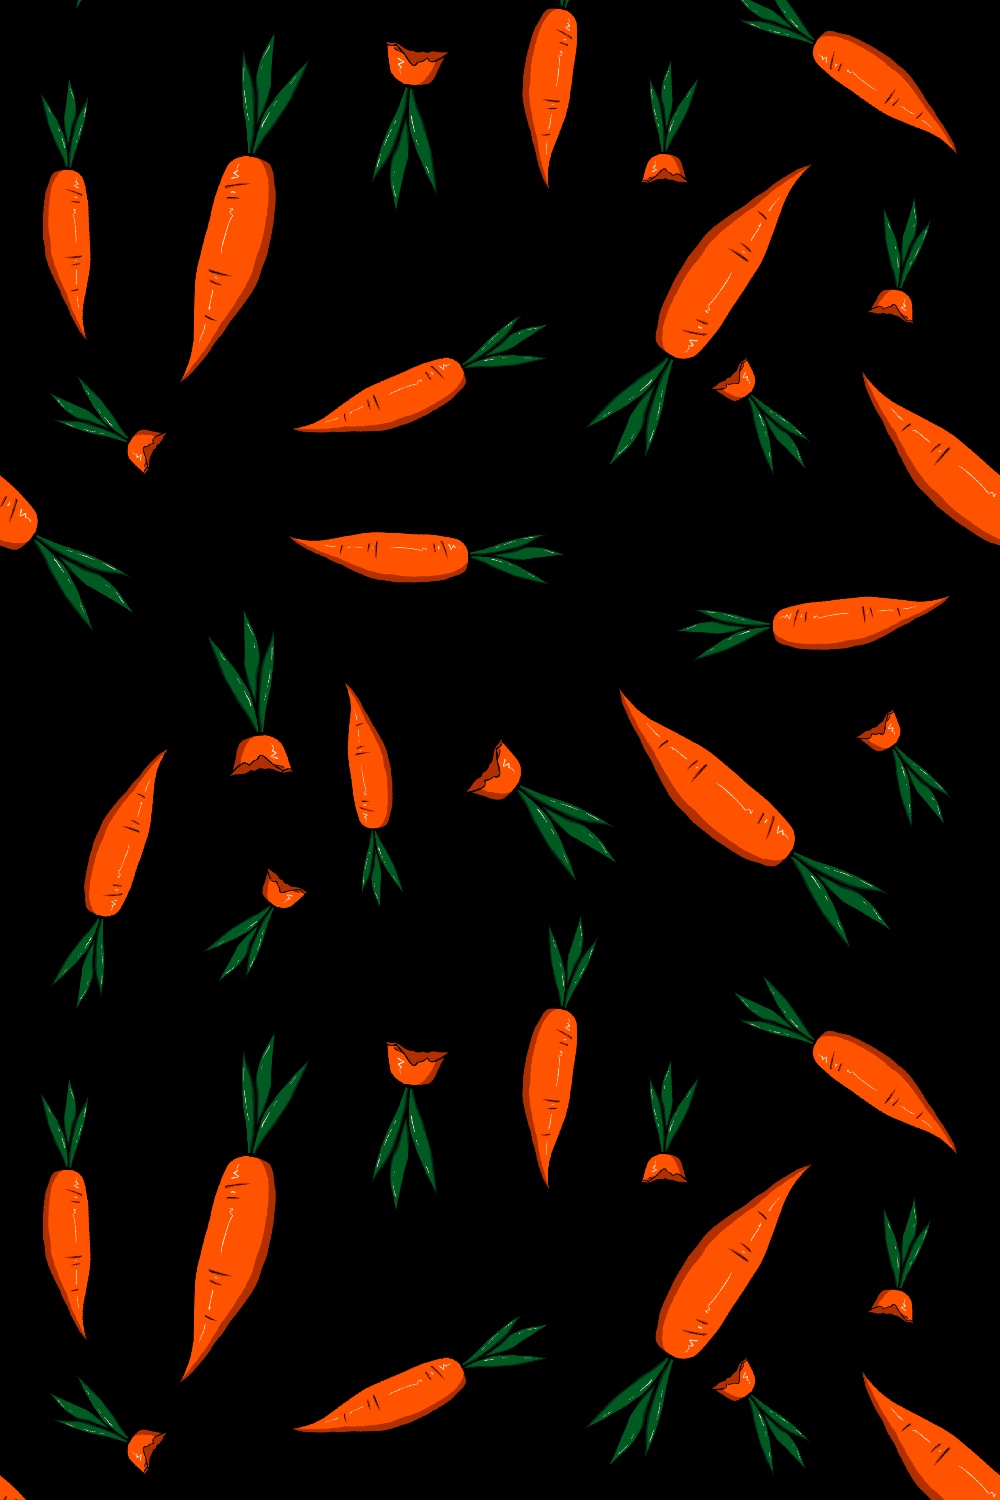 Original Seamless Patterns ‘Farmers Harvest’ with Vegetables carrot.